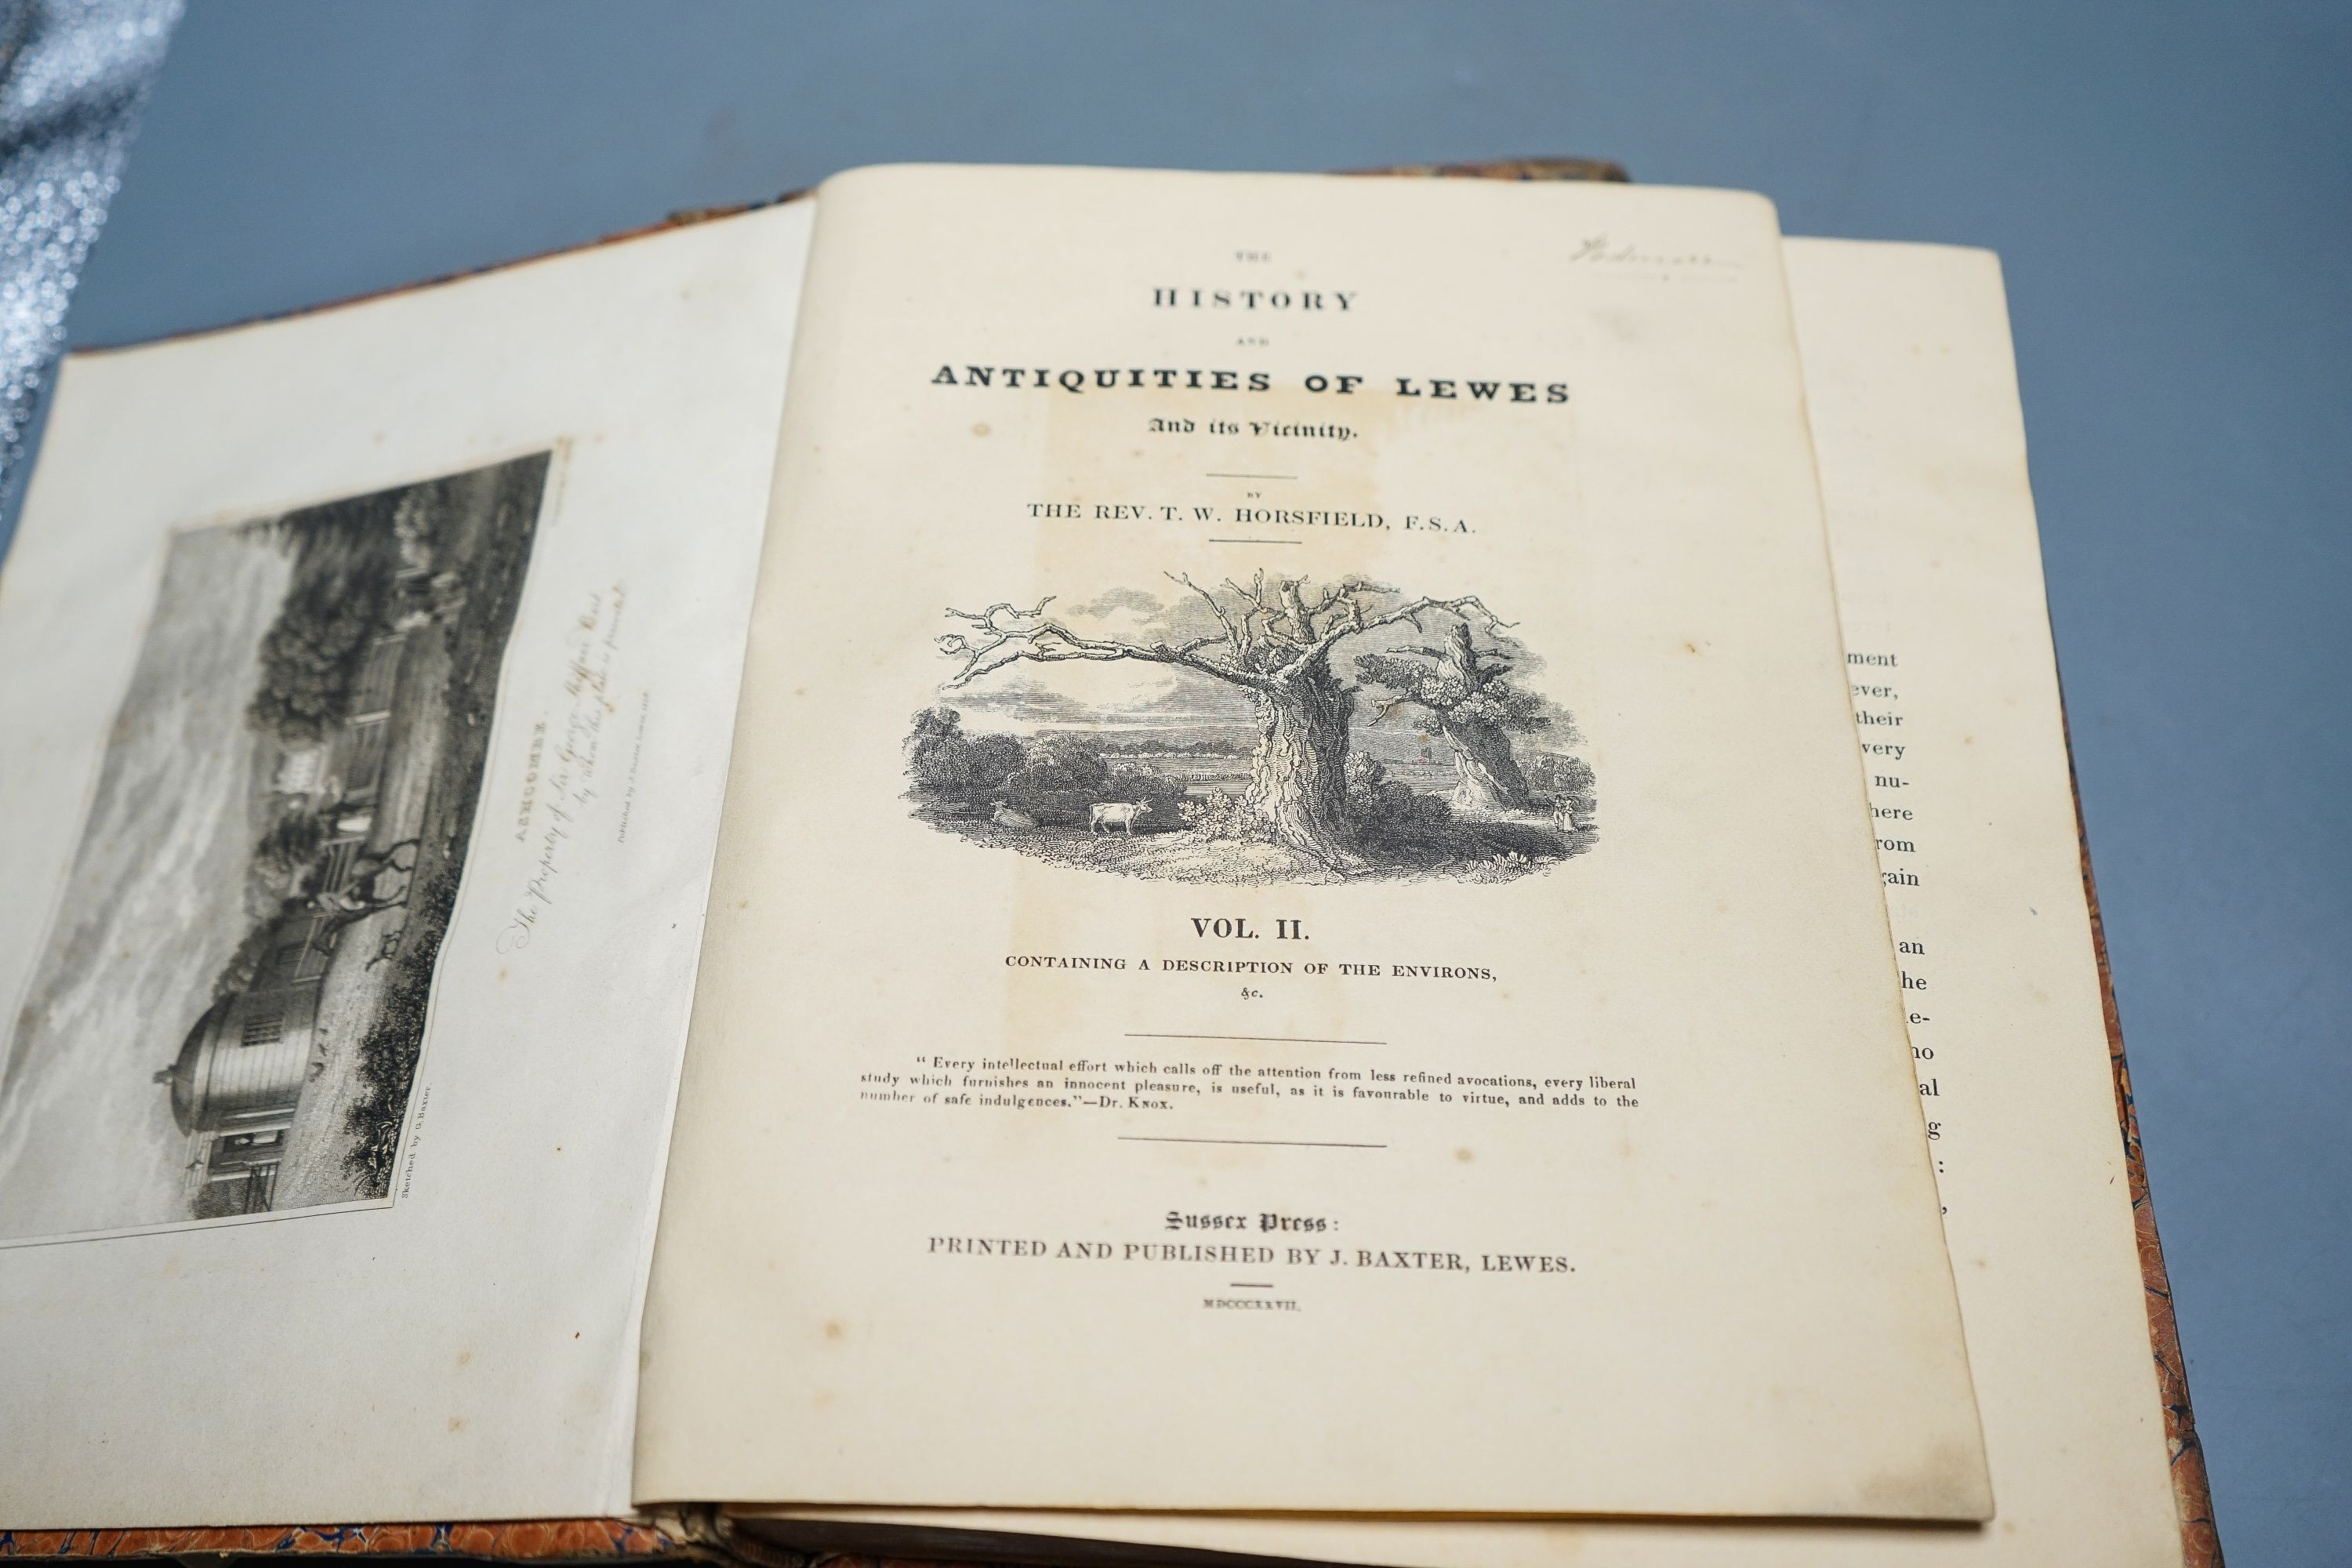 Horsfield, Thomas Walker - The History, Antiquities and Topography of the County of Sussex, 2 vols, Lewes 1835